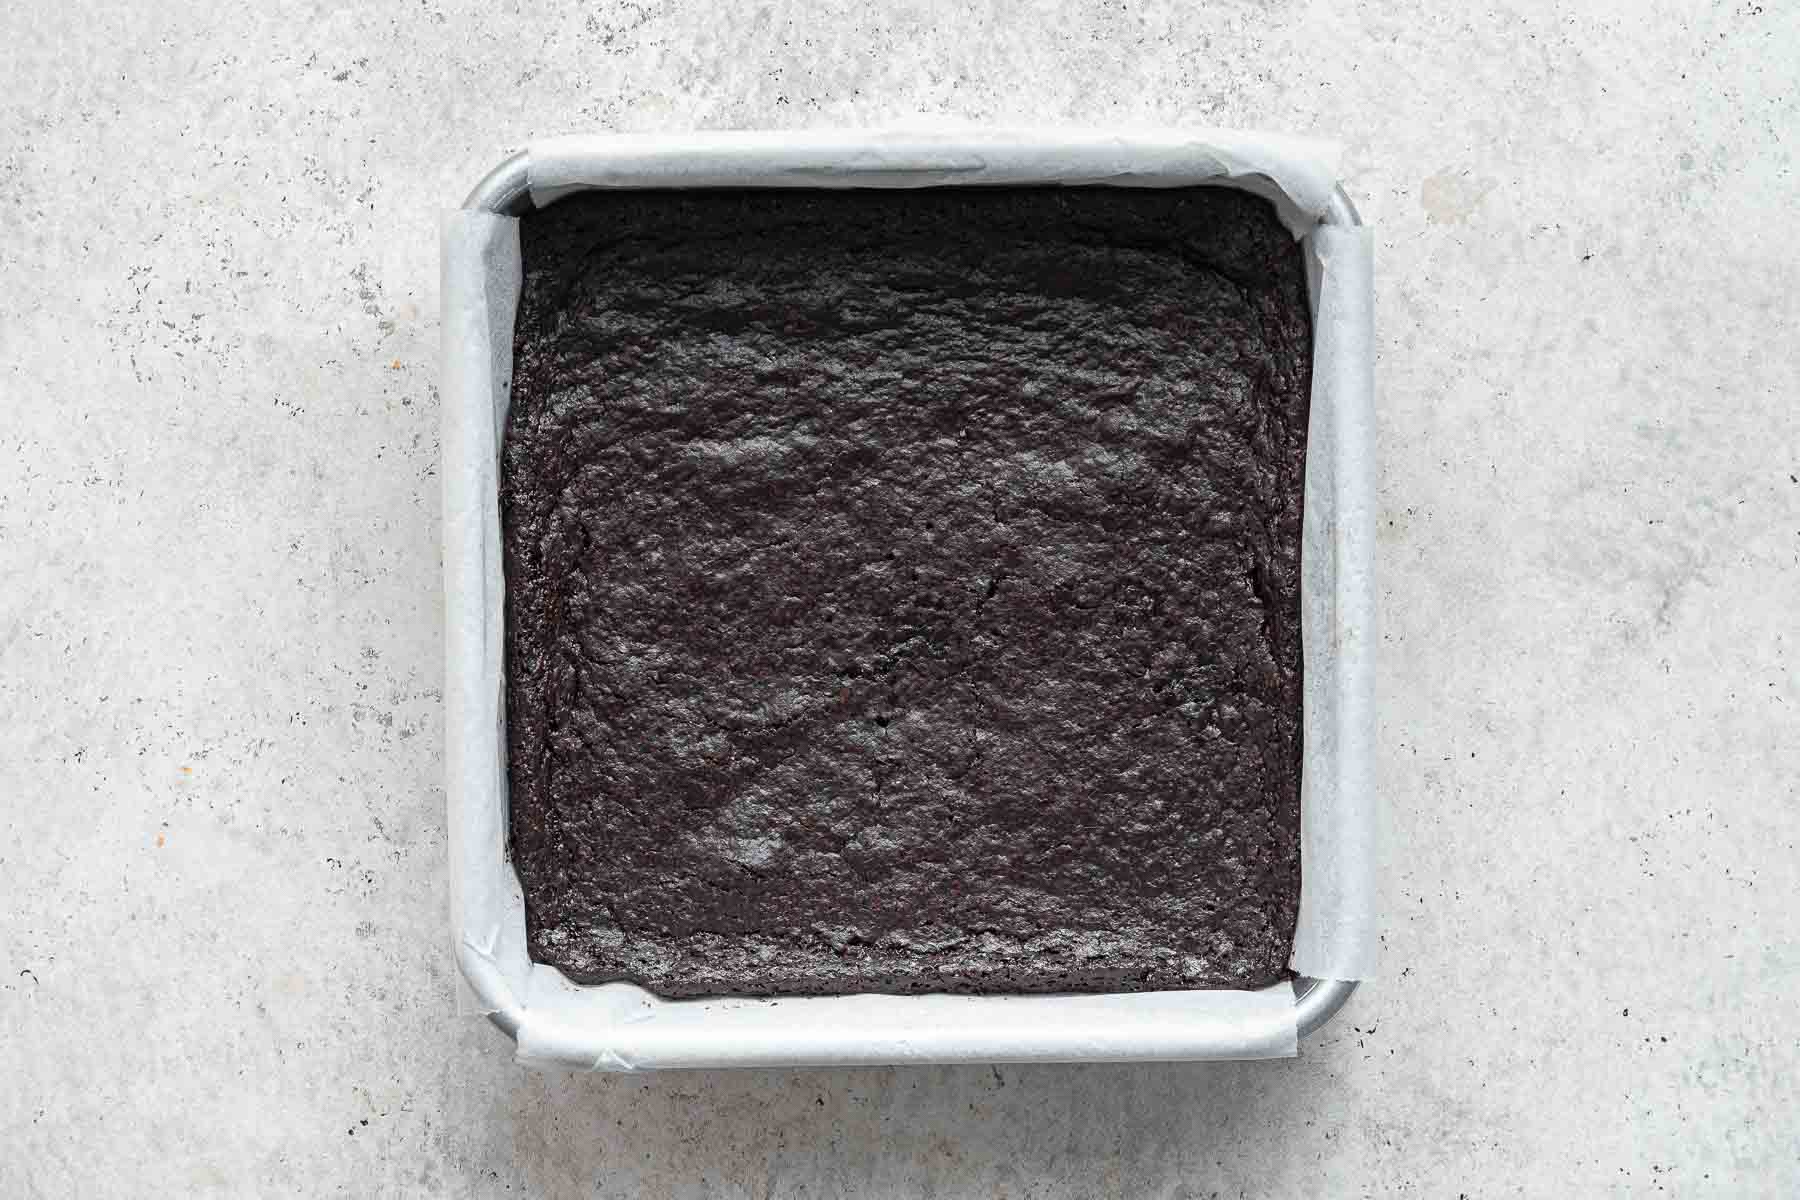 Freshly baked brownies in a square pan lined with white parchment paper.